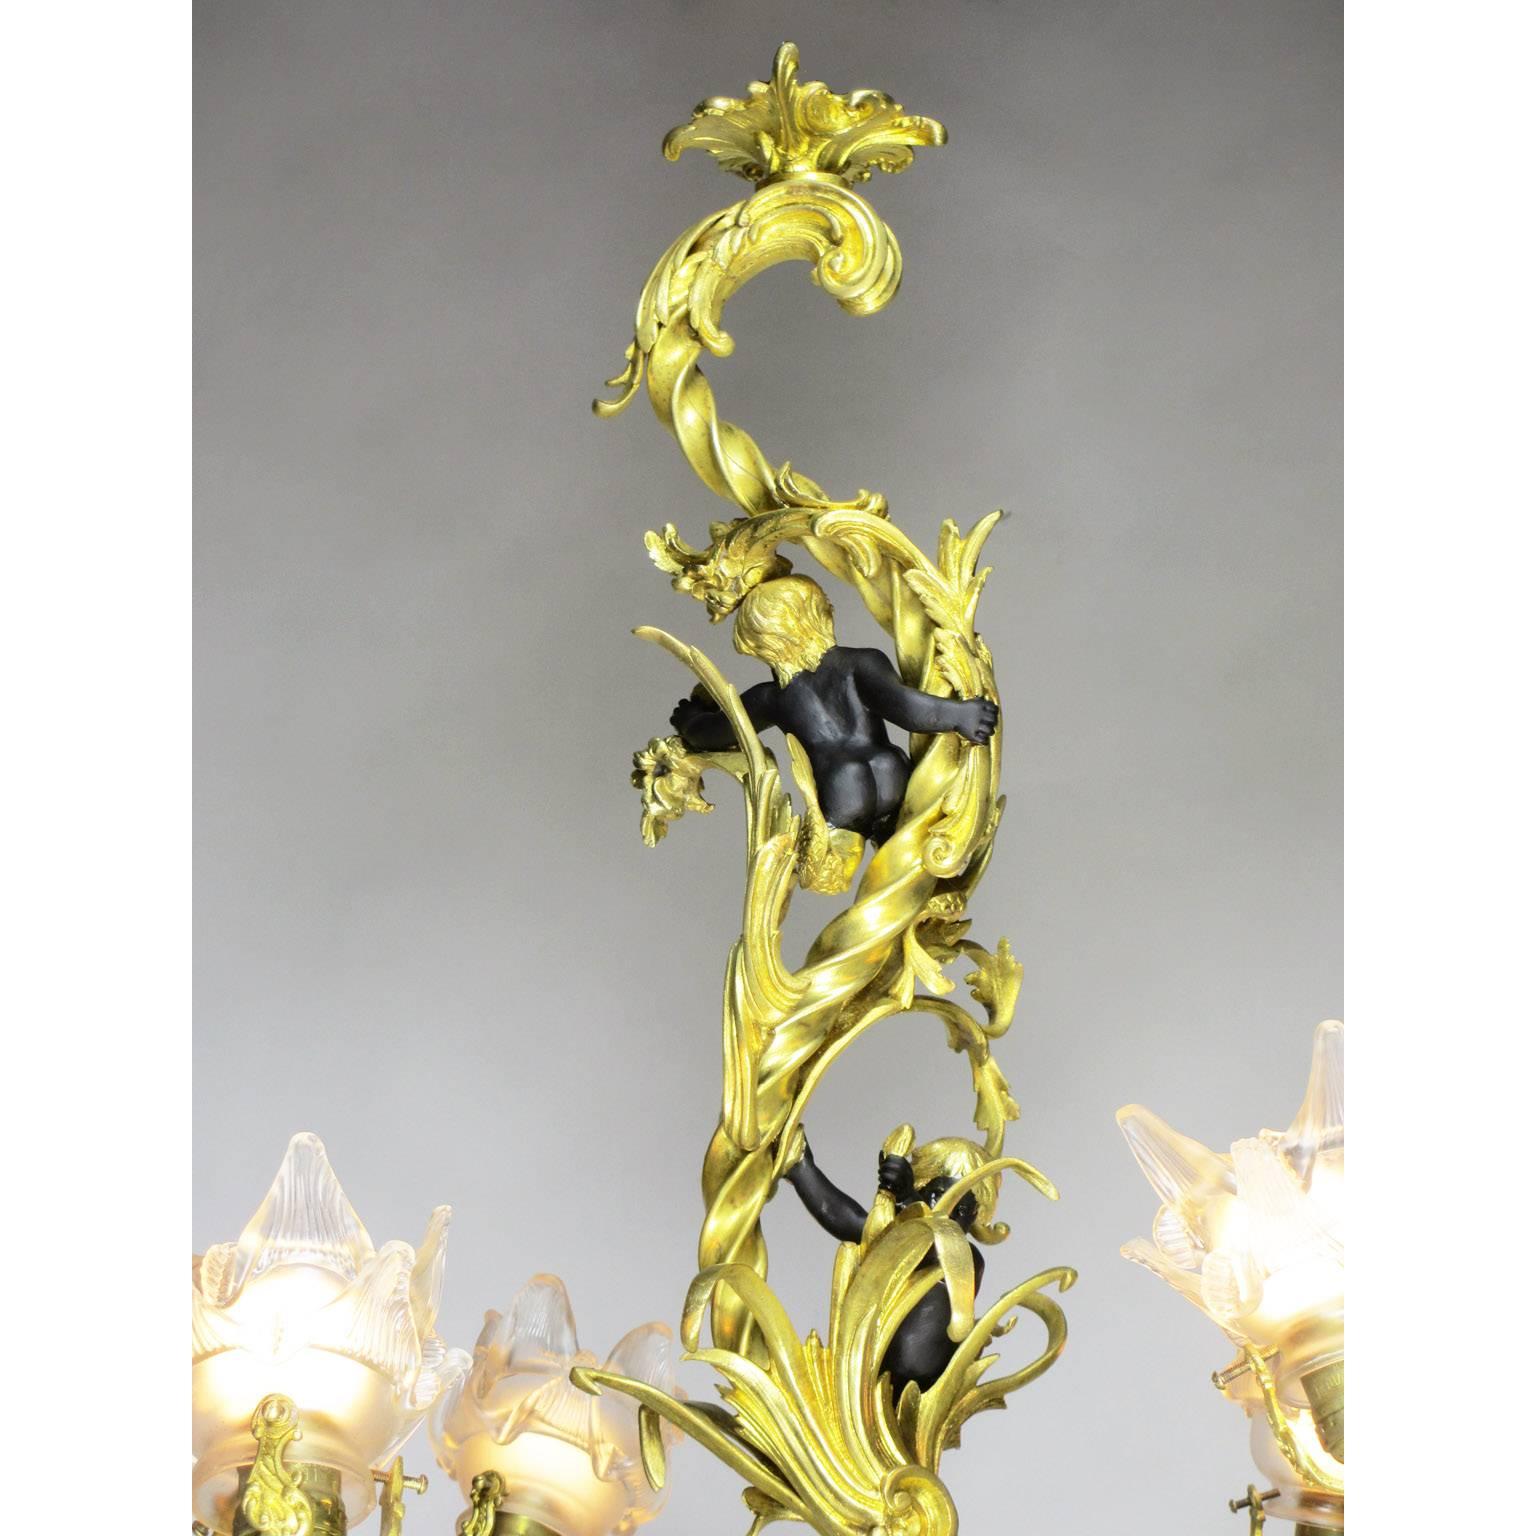 A fine French Belle Époque gilt and patinated bronze figural four-light whimsical chandelier. The scrolled gilt bronze body with branched arm lights with floral frosted glass shades, the upper stem surmounted with a pair of black-patinated bronze